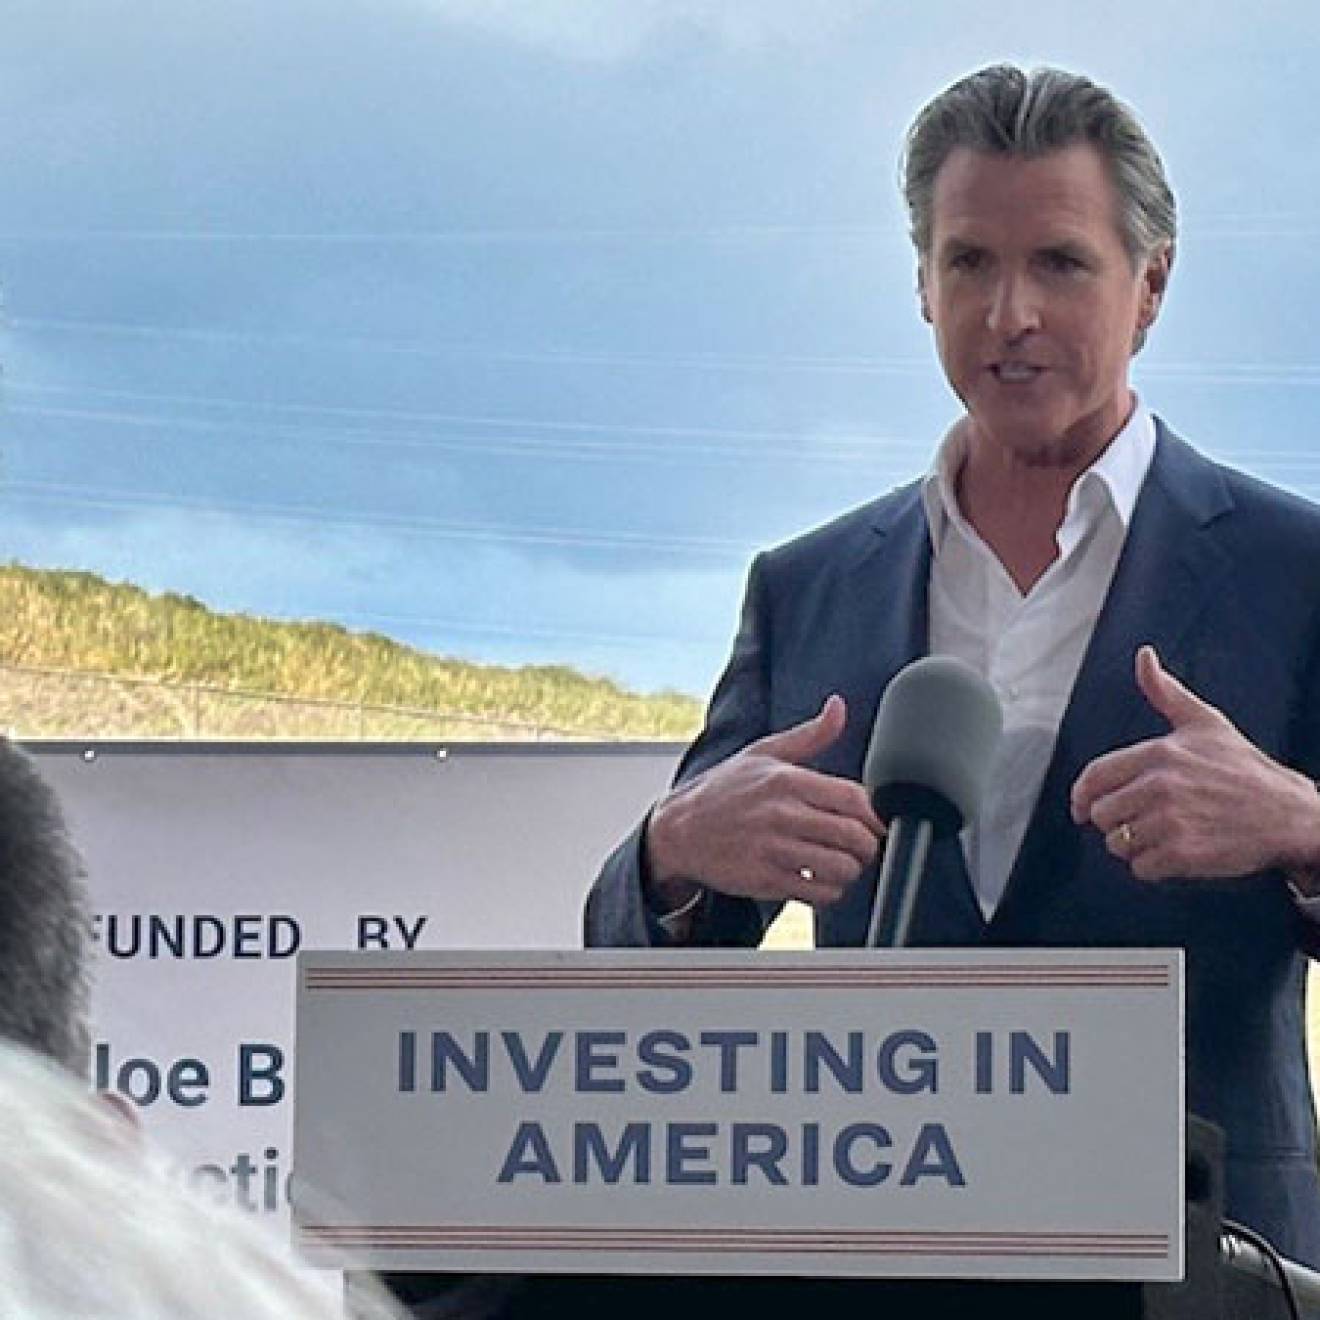 Governor Newsom speaking at a podium that says Investing in America, with countryside behind him